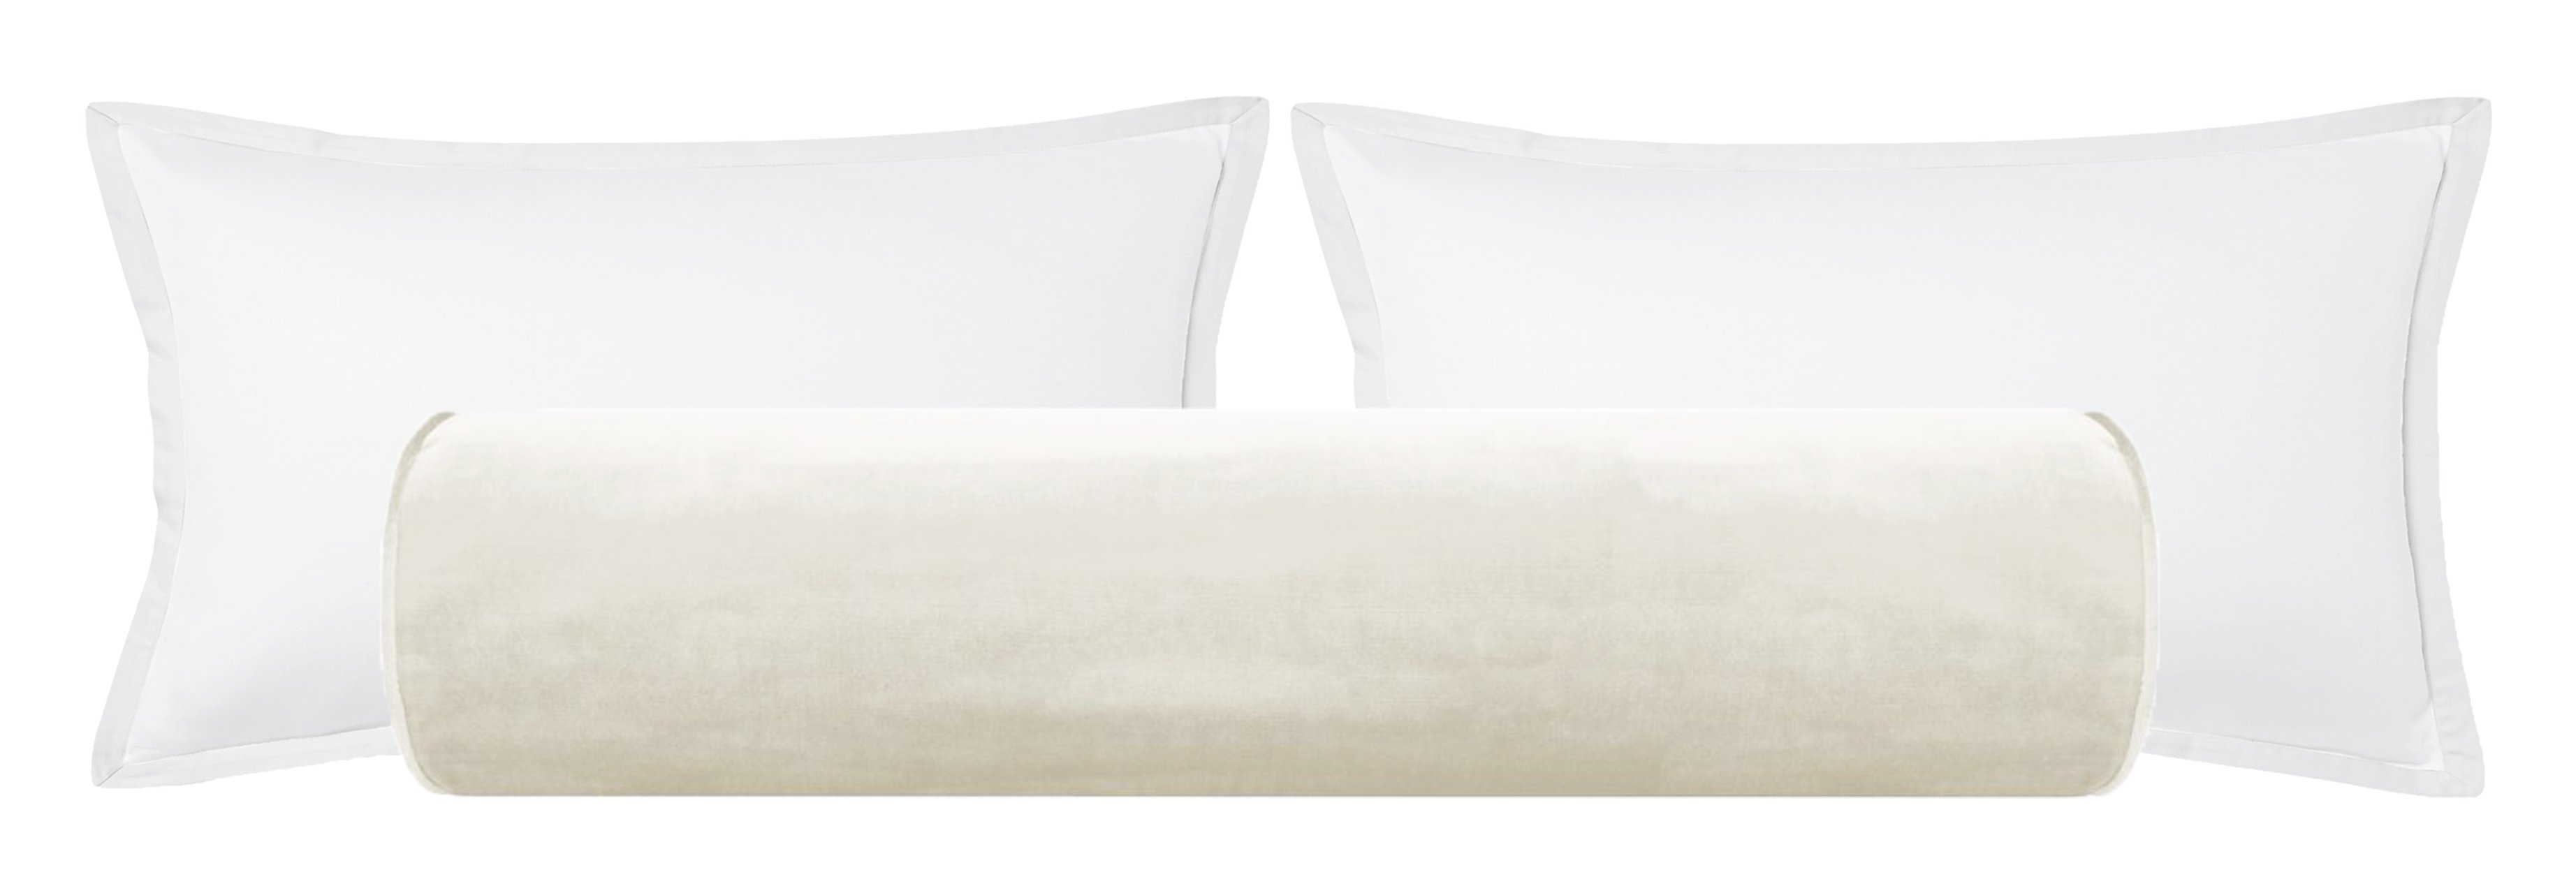 THE BOLSTER :: FAUX SILK VELVET // ALABASTER - TWIN XL // 9" X 30" - Image 0